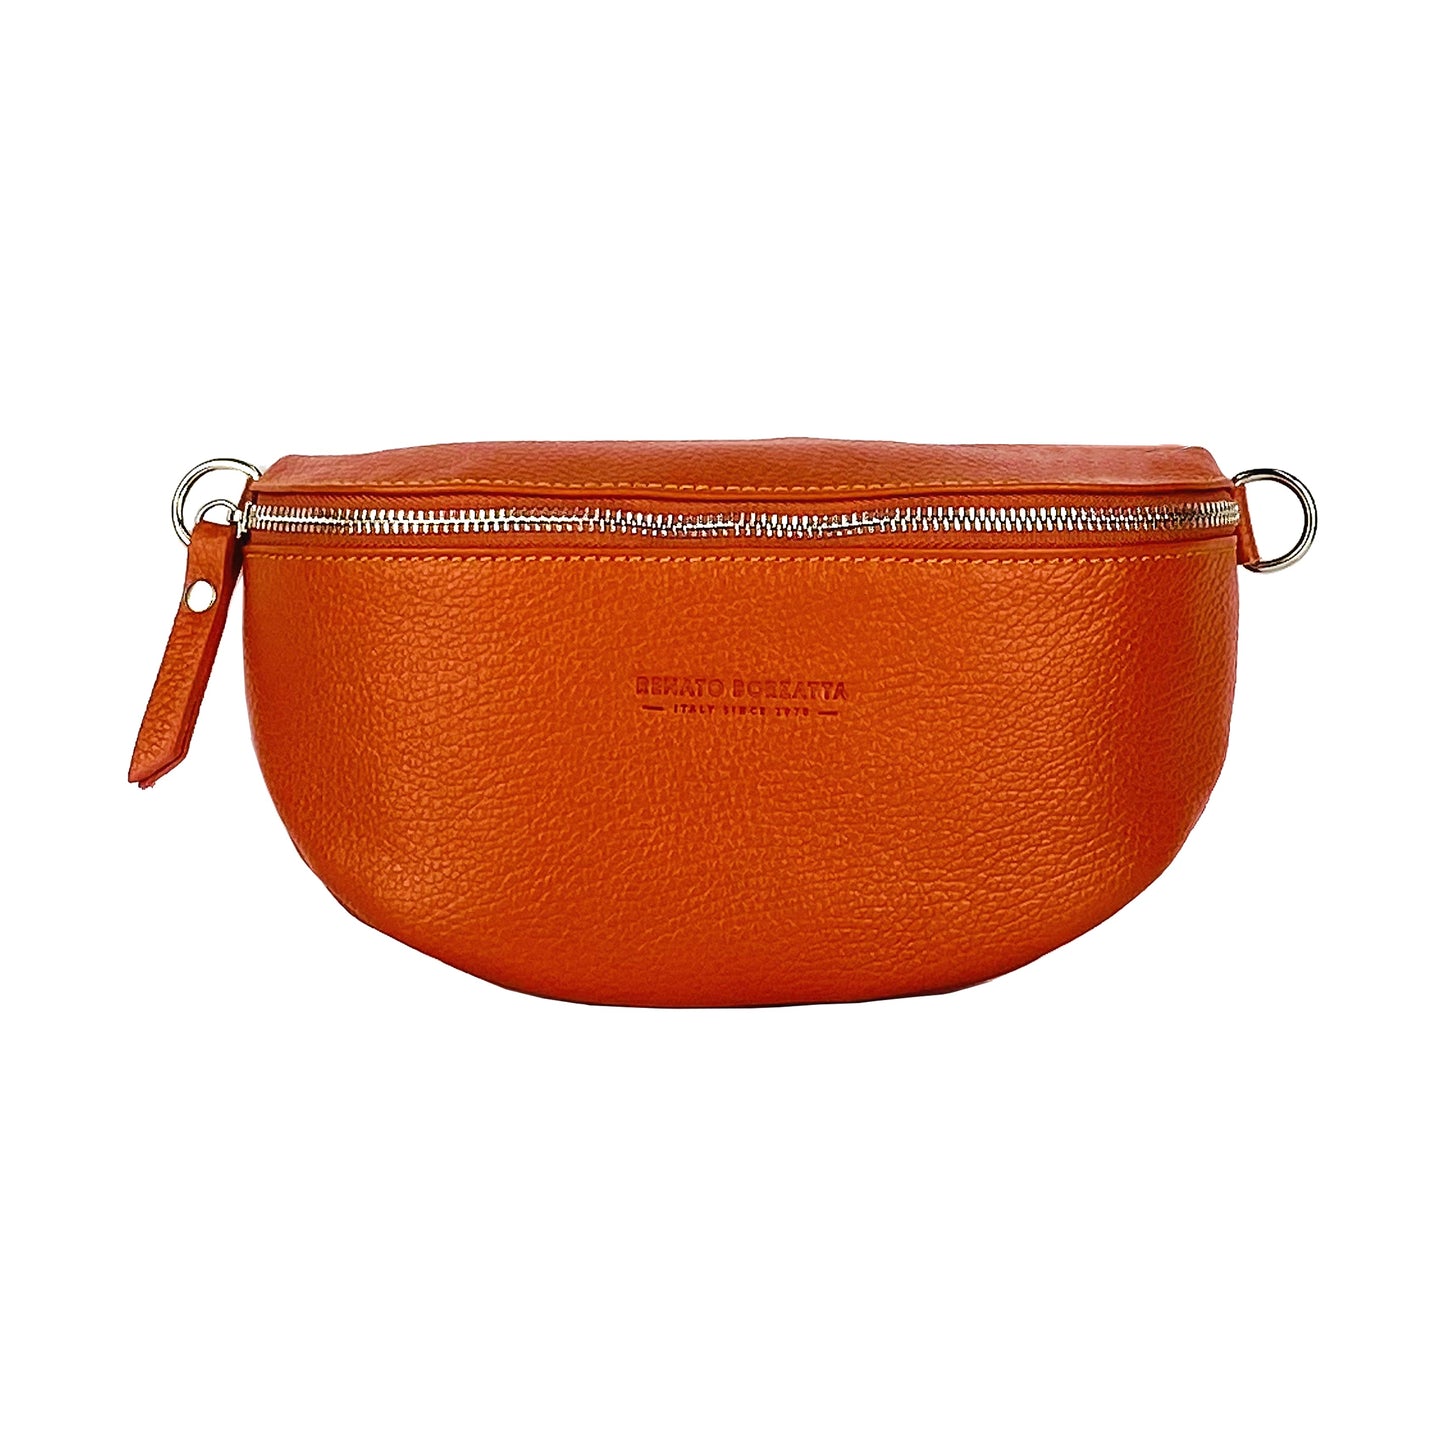 RB1015L | Waist bag with removable shoulder strap in Genuine Leather Made in Italy. Attachments with shiny nickel metal snap hooks - Orange color - Dimensions: 24 x 14 x 7-1